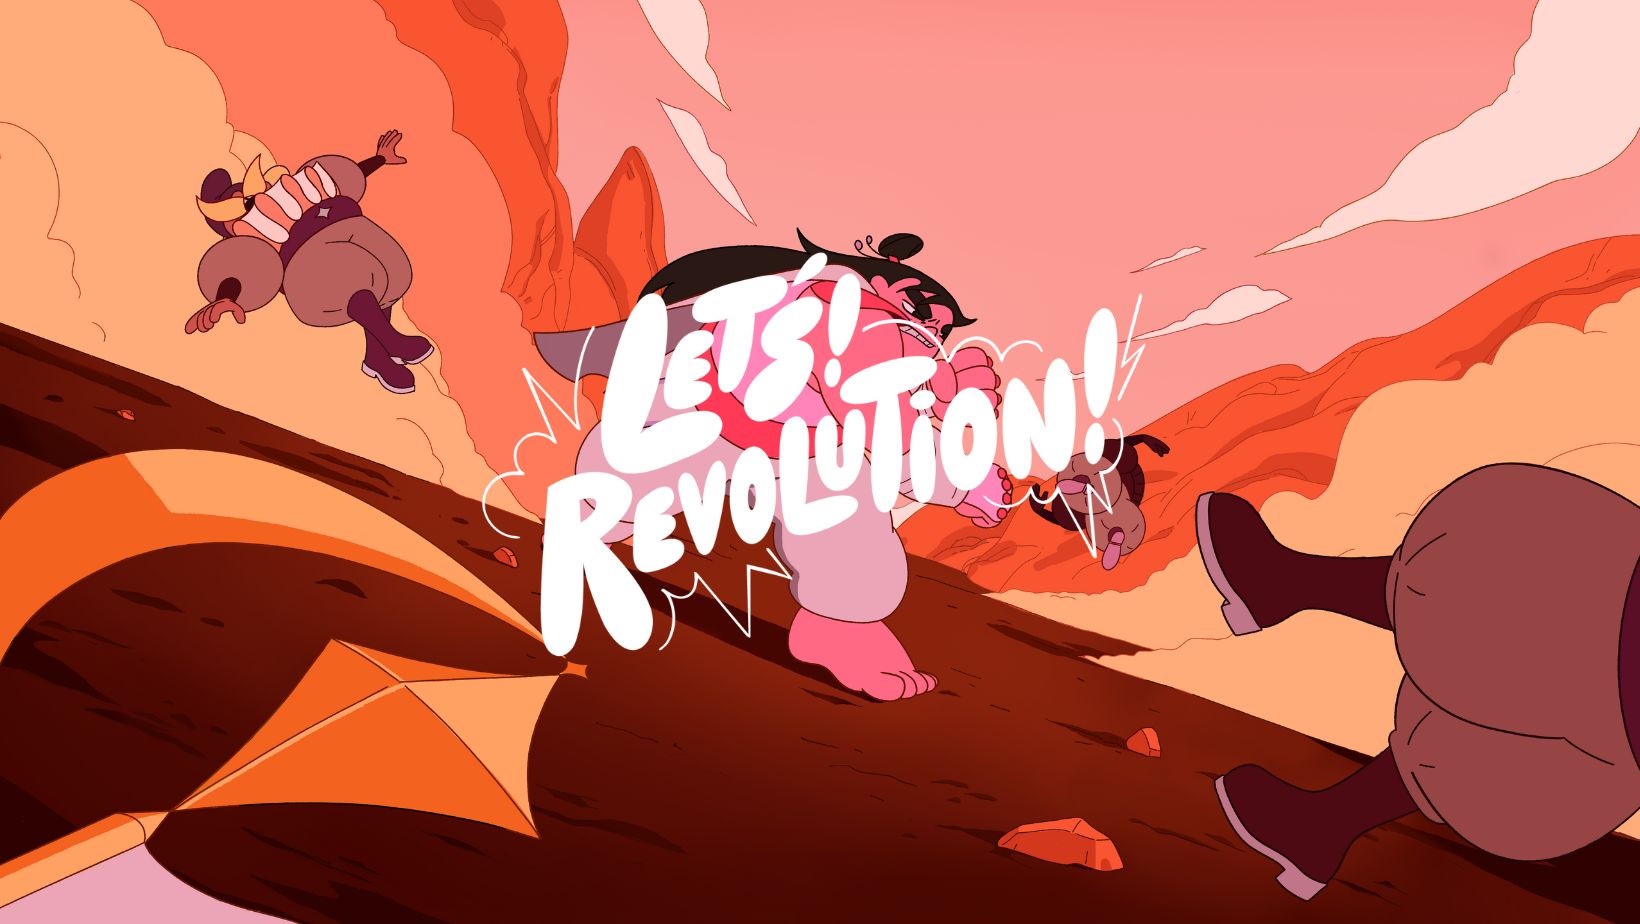 cartoon people fighting over the words "Let's! Revolution!"